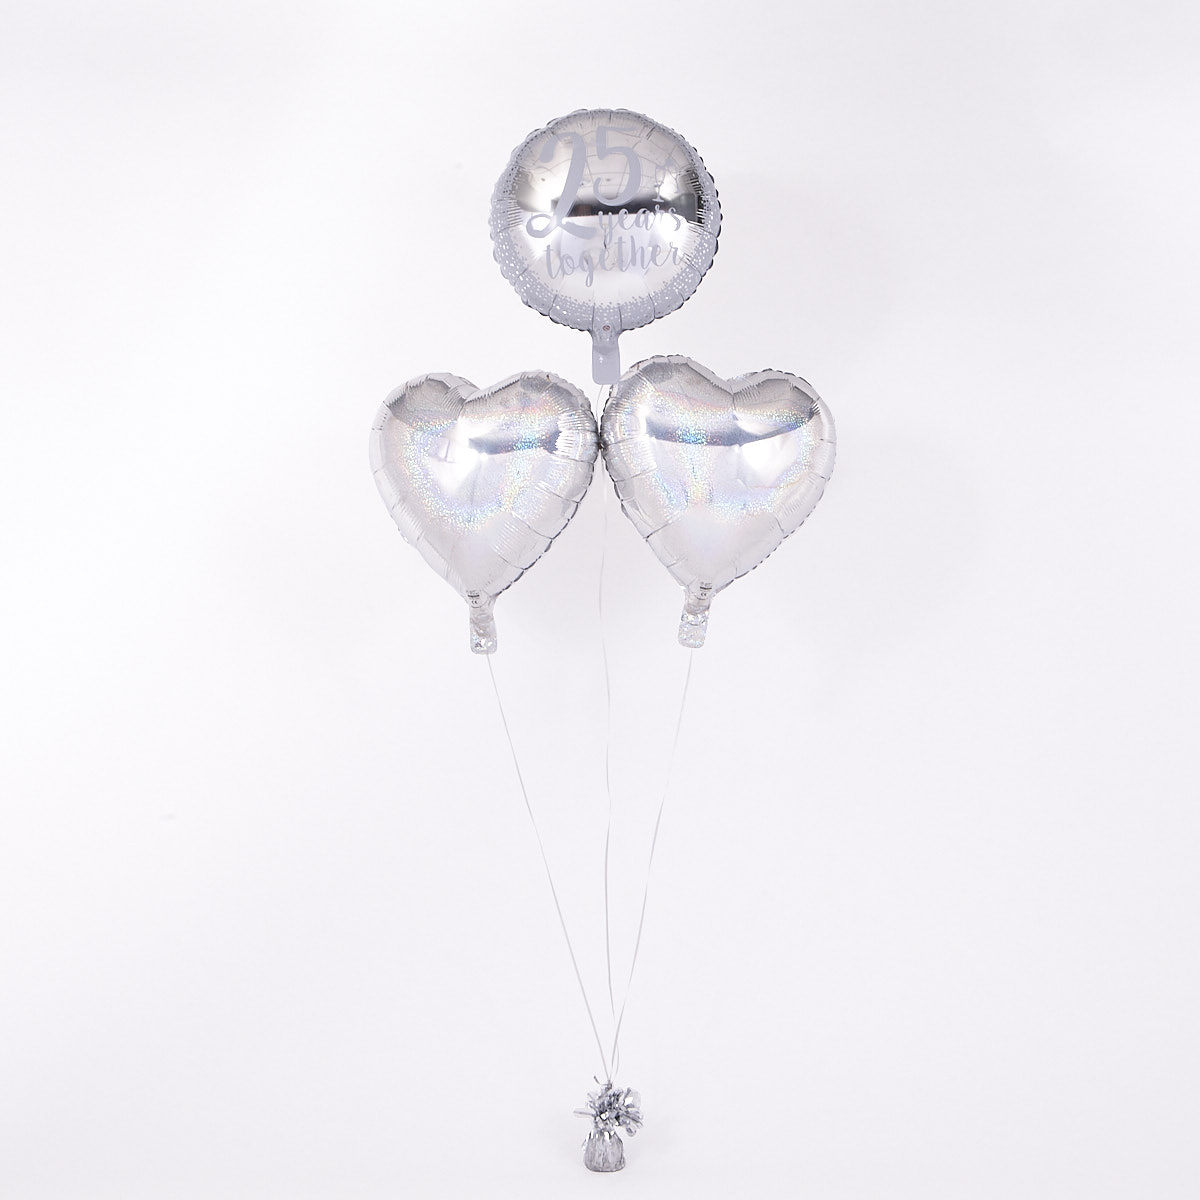 25th Anniversary Silver Wedding Romantic Balloon Bouquet - DELIVERED INFLATED!